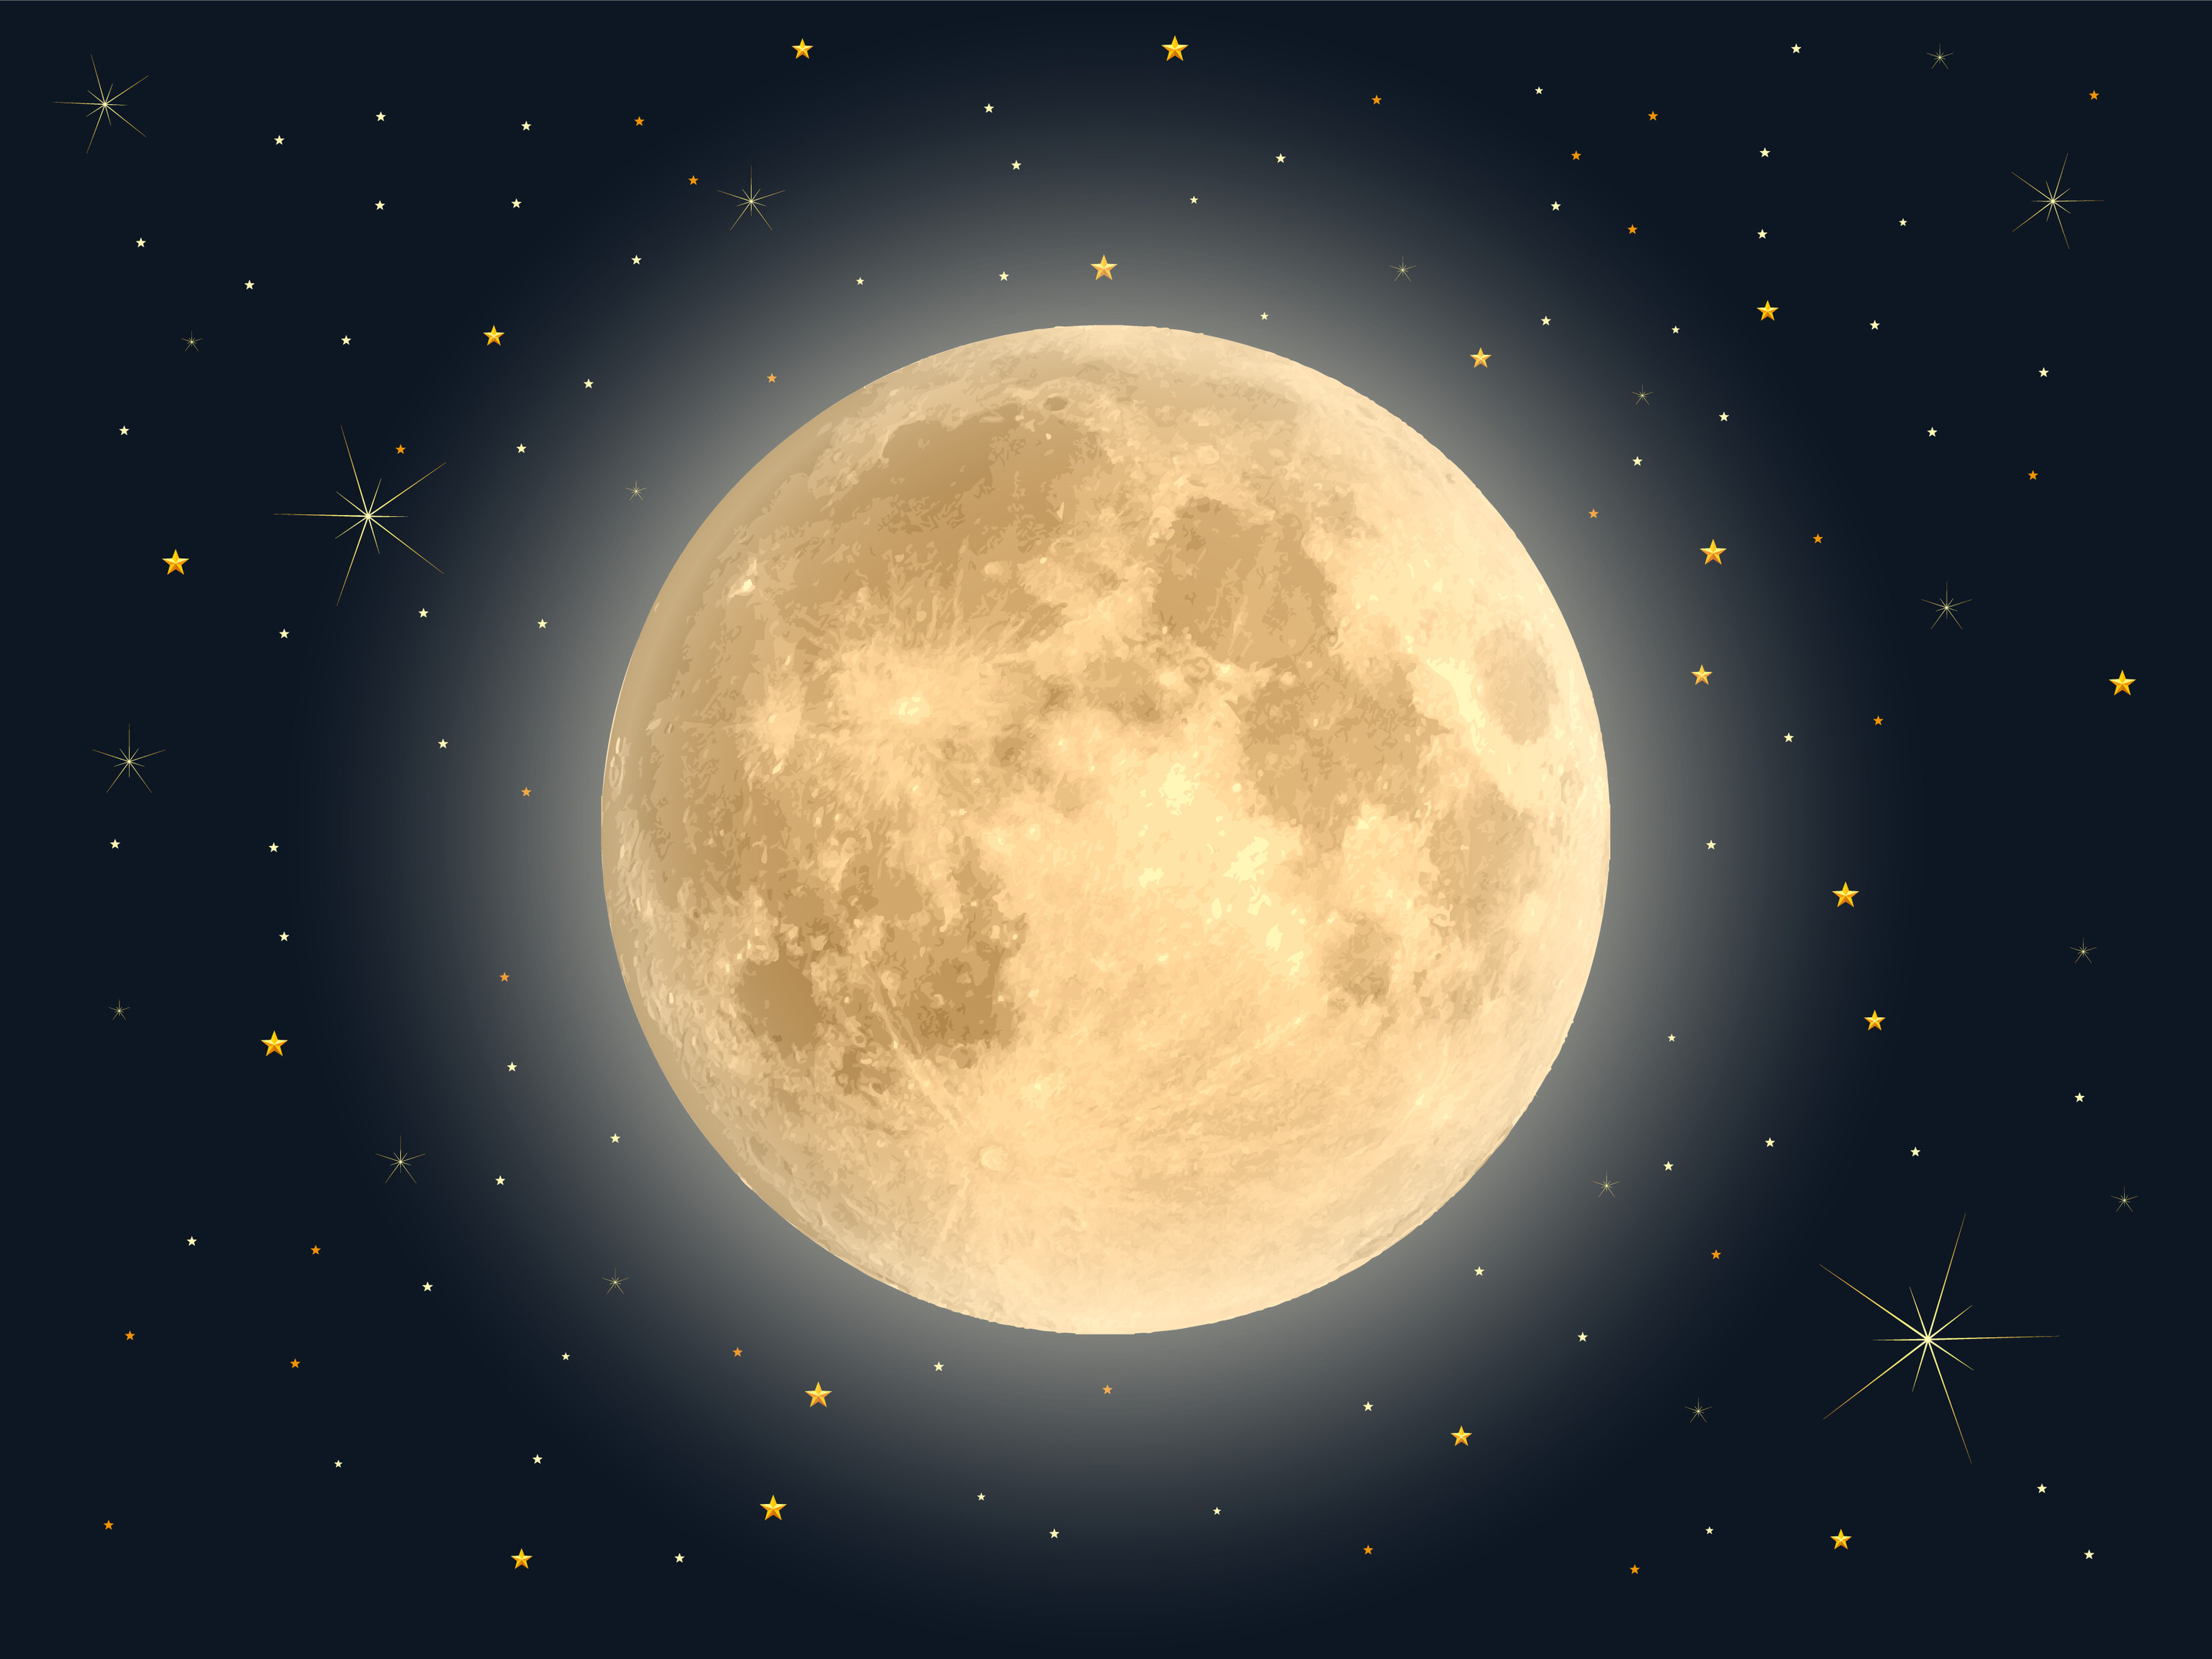 The moon inspired a fantasy novel written in Latin by German astronaut Johannes Kepler in the 17th century, and it in turn has inspired an opera, Somnium, with libretto by Diana Liao and music by Steve Hui. Photo: Shutterstock